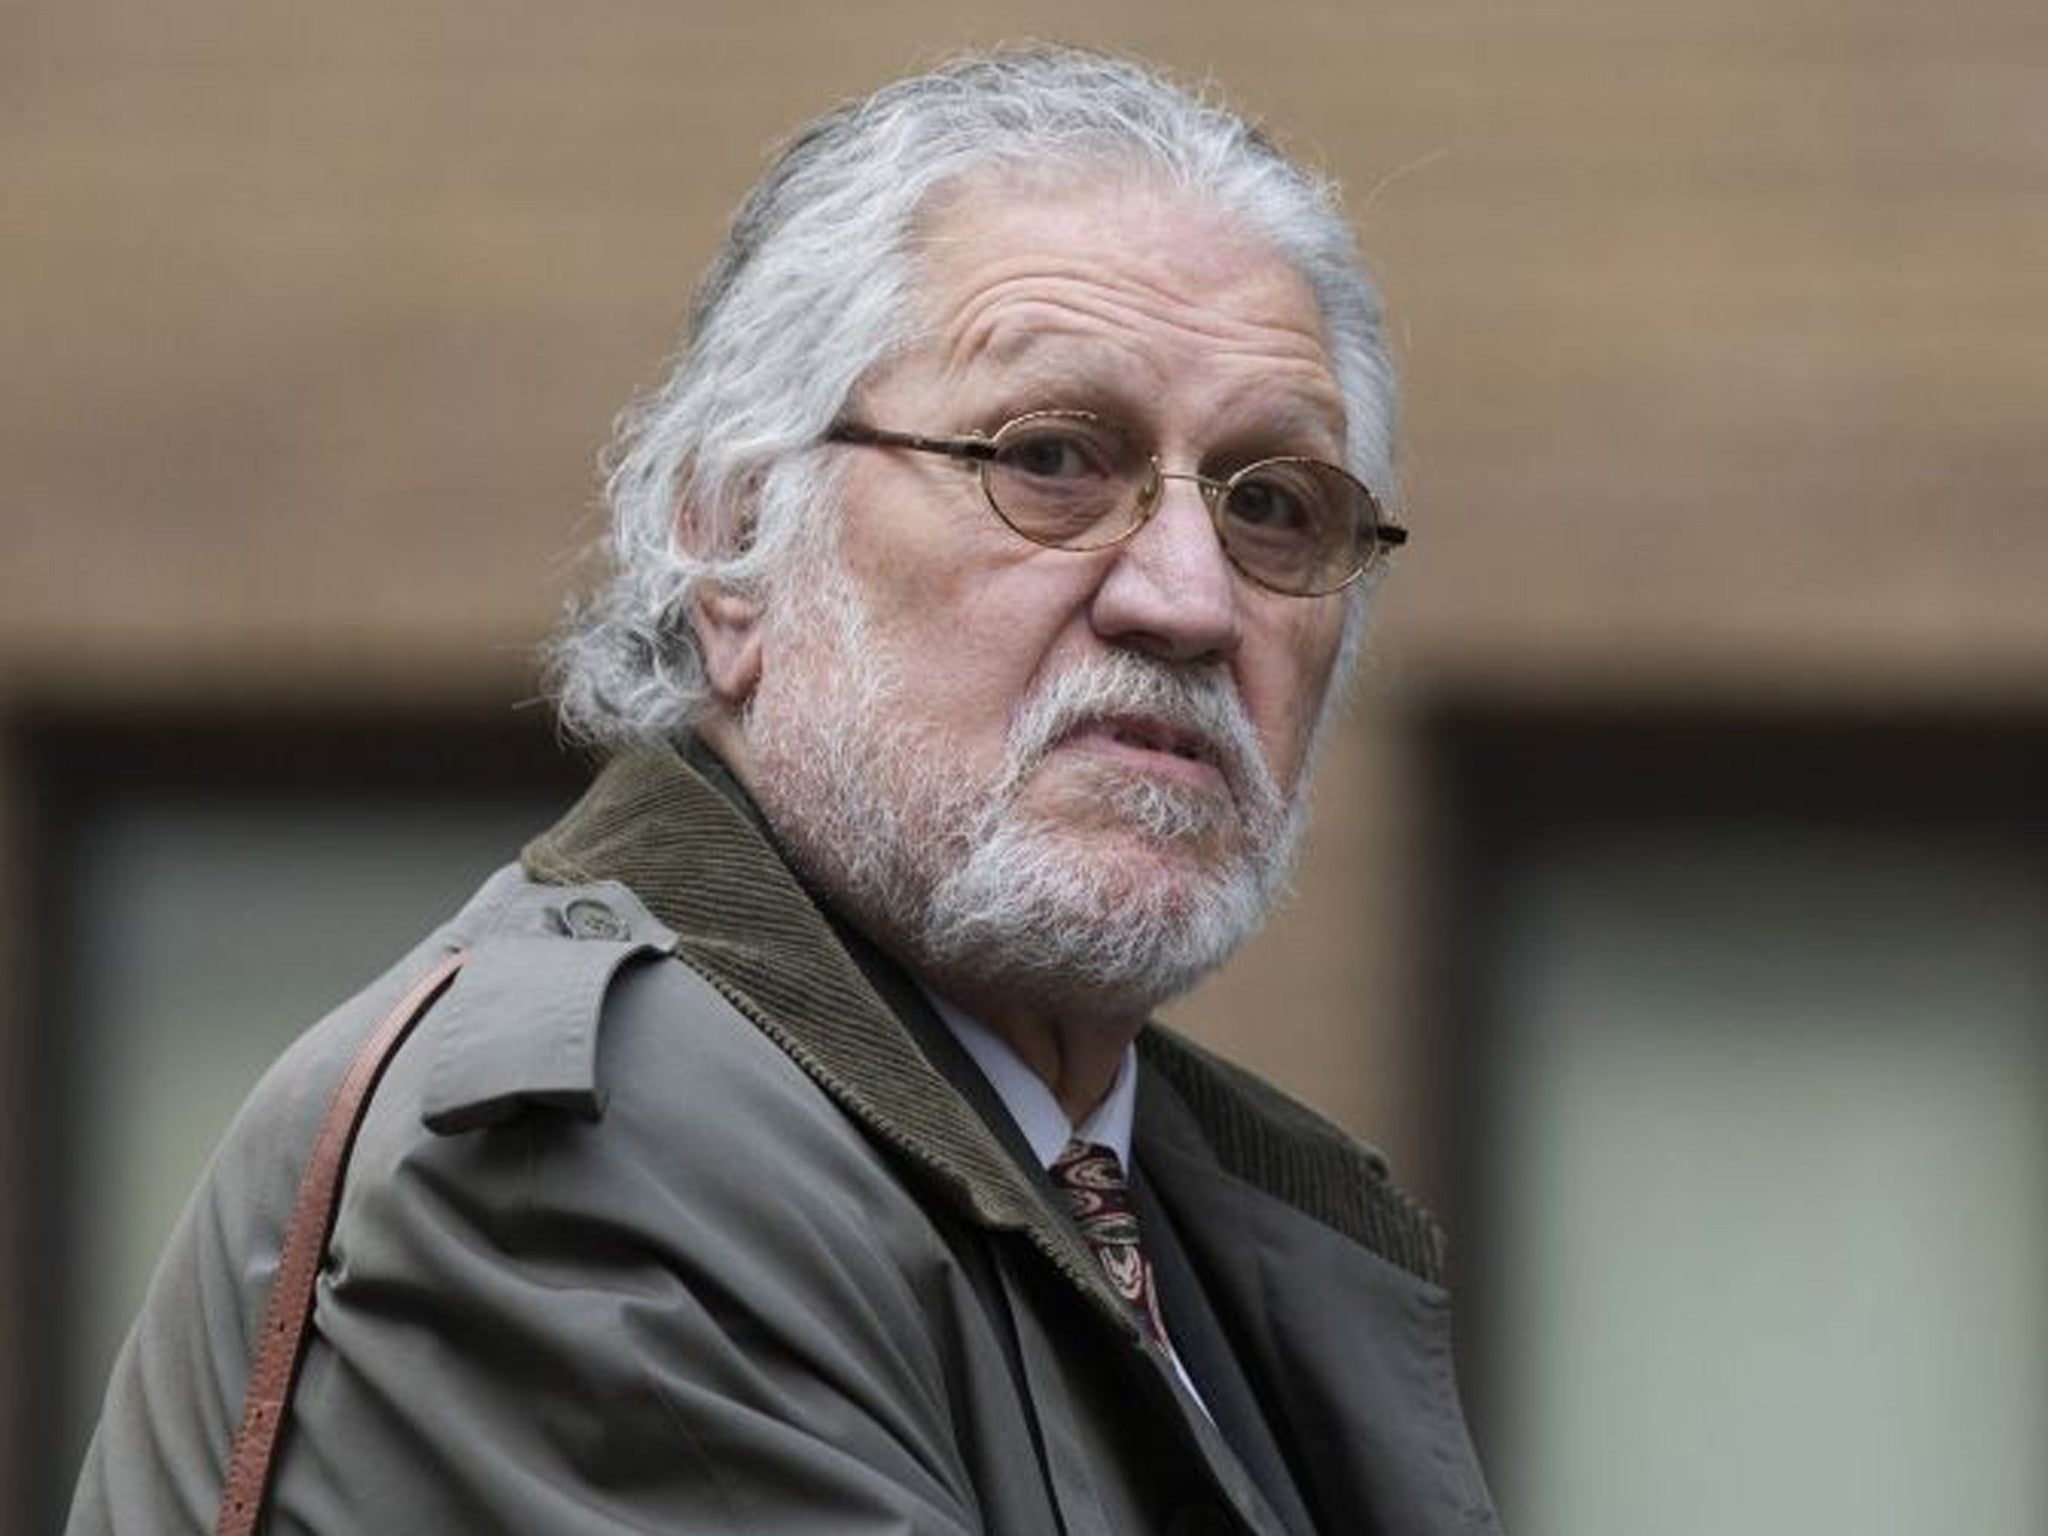 Dave Lee Travis found not guilty on 12 charges of indecent assault